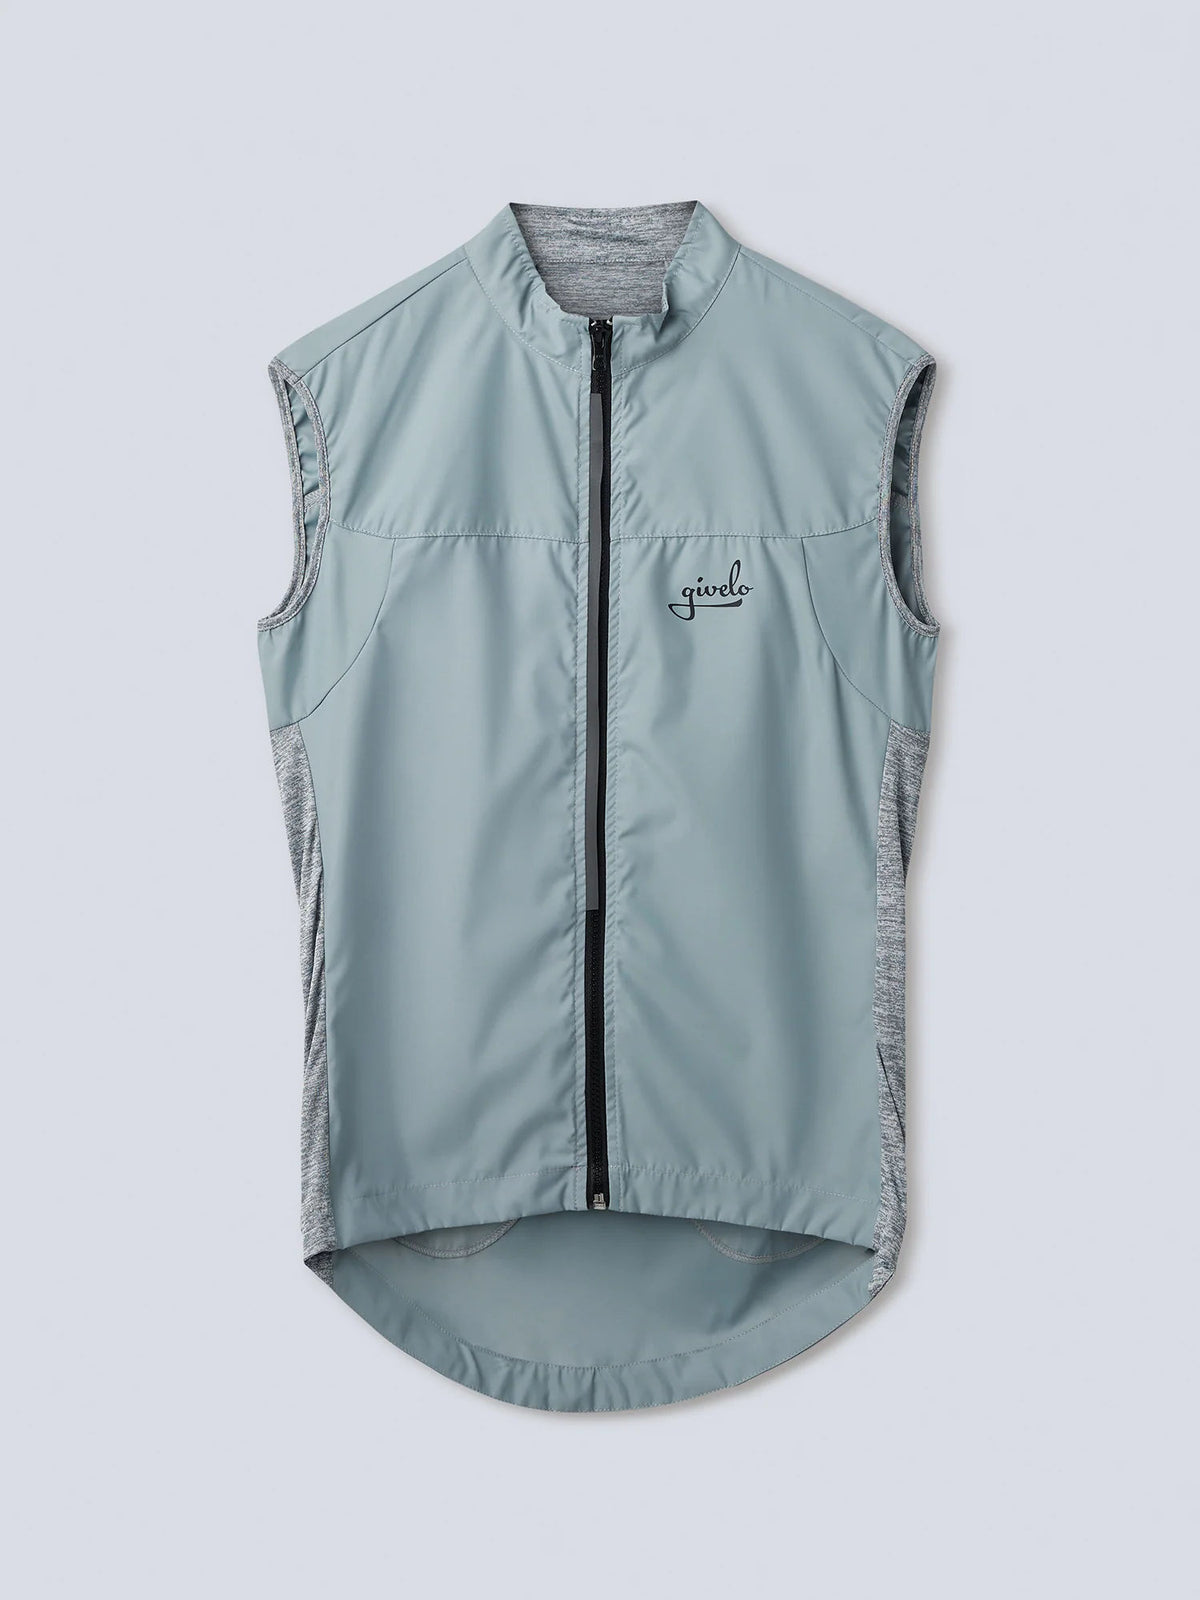 Givelo Quick-Free Gilet Grey レディース サイクルジレ | GEARED